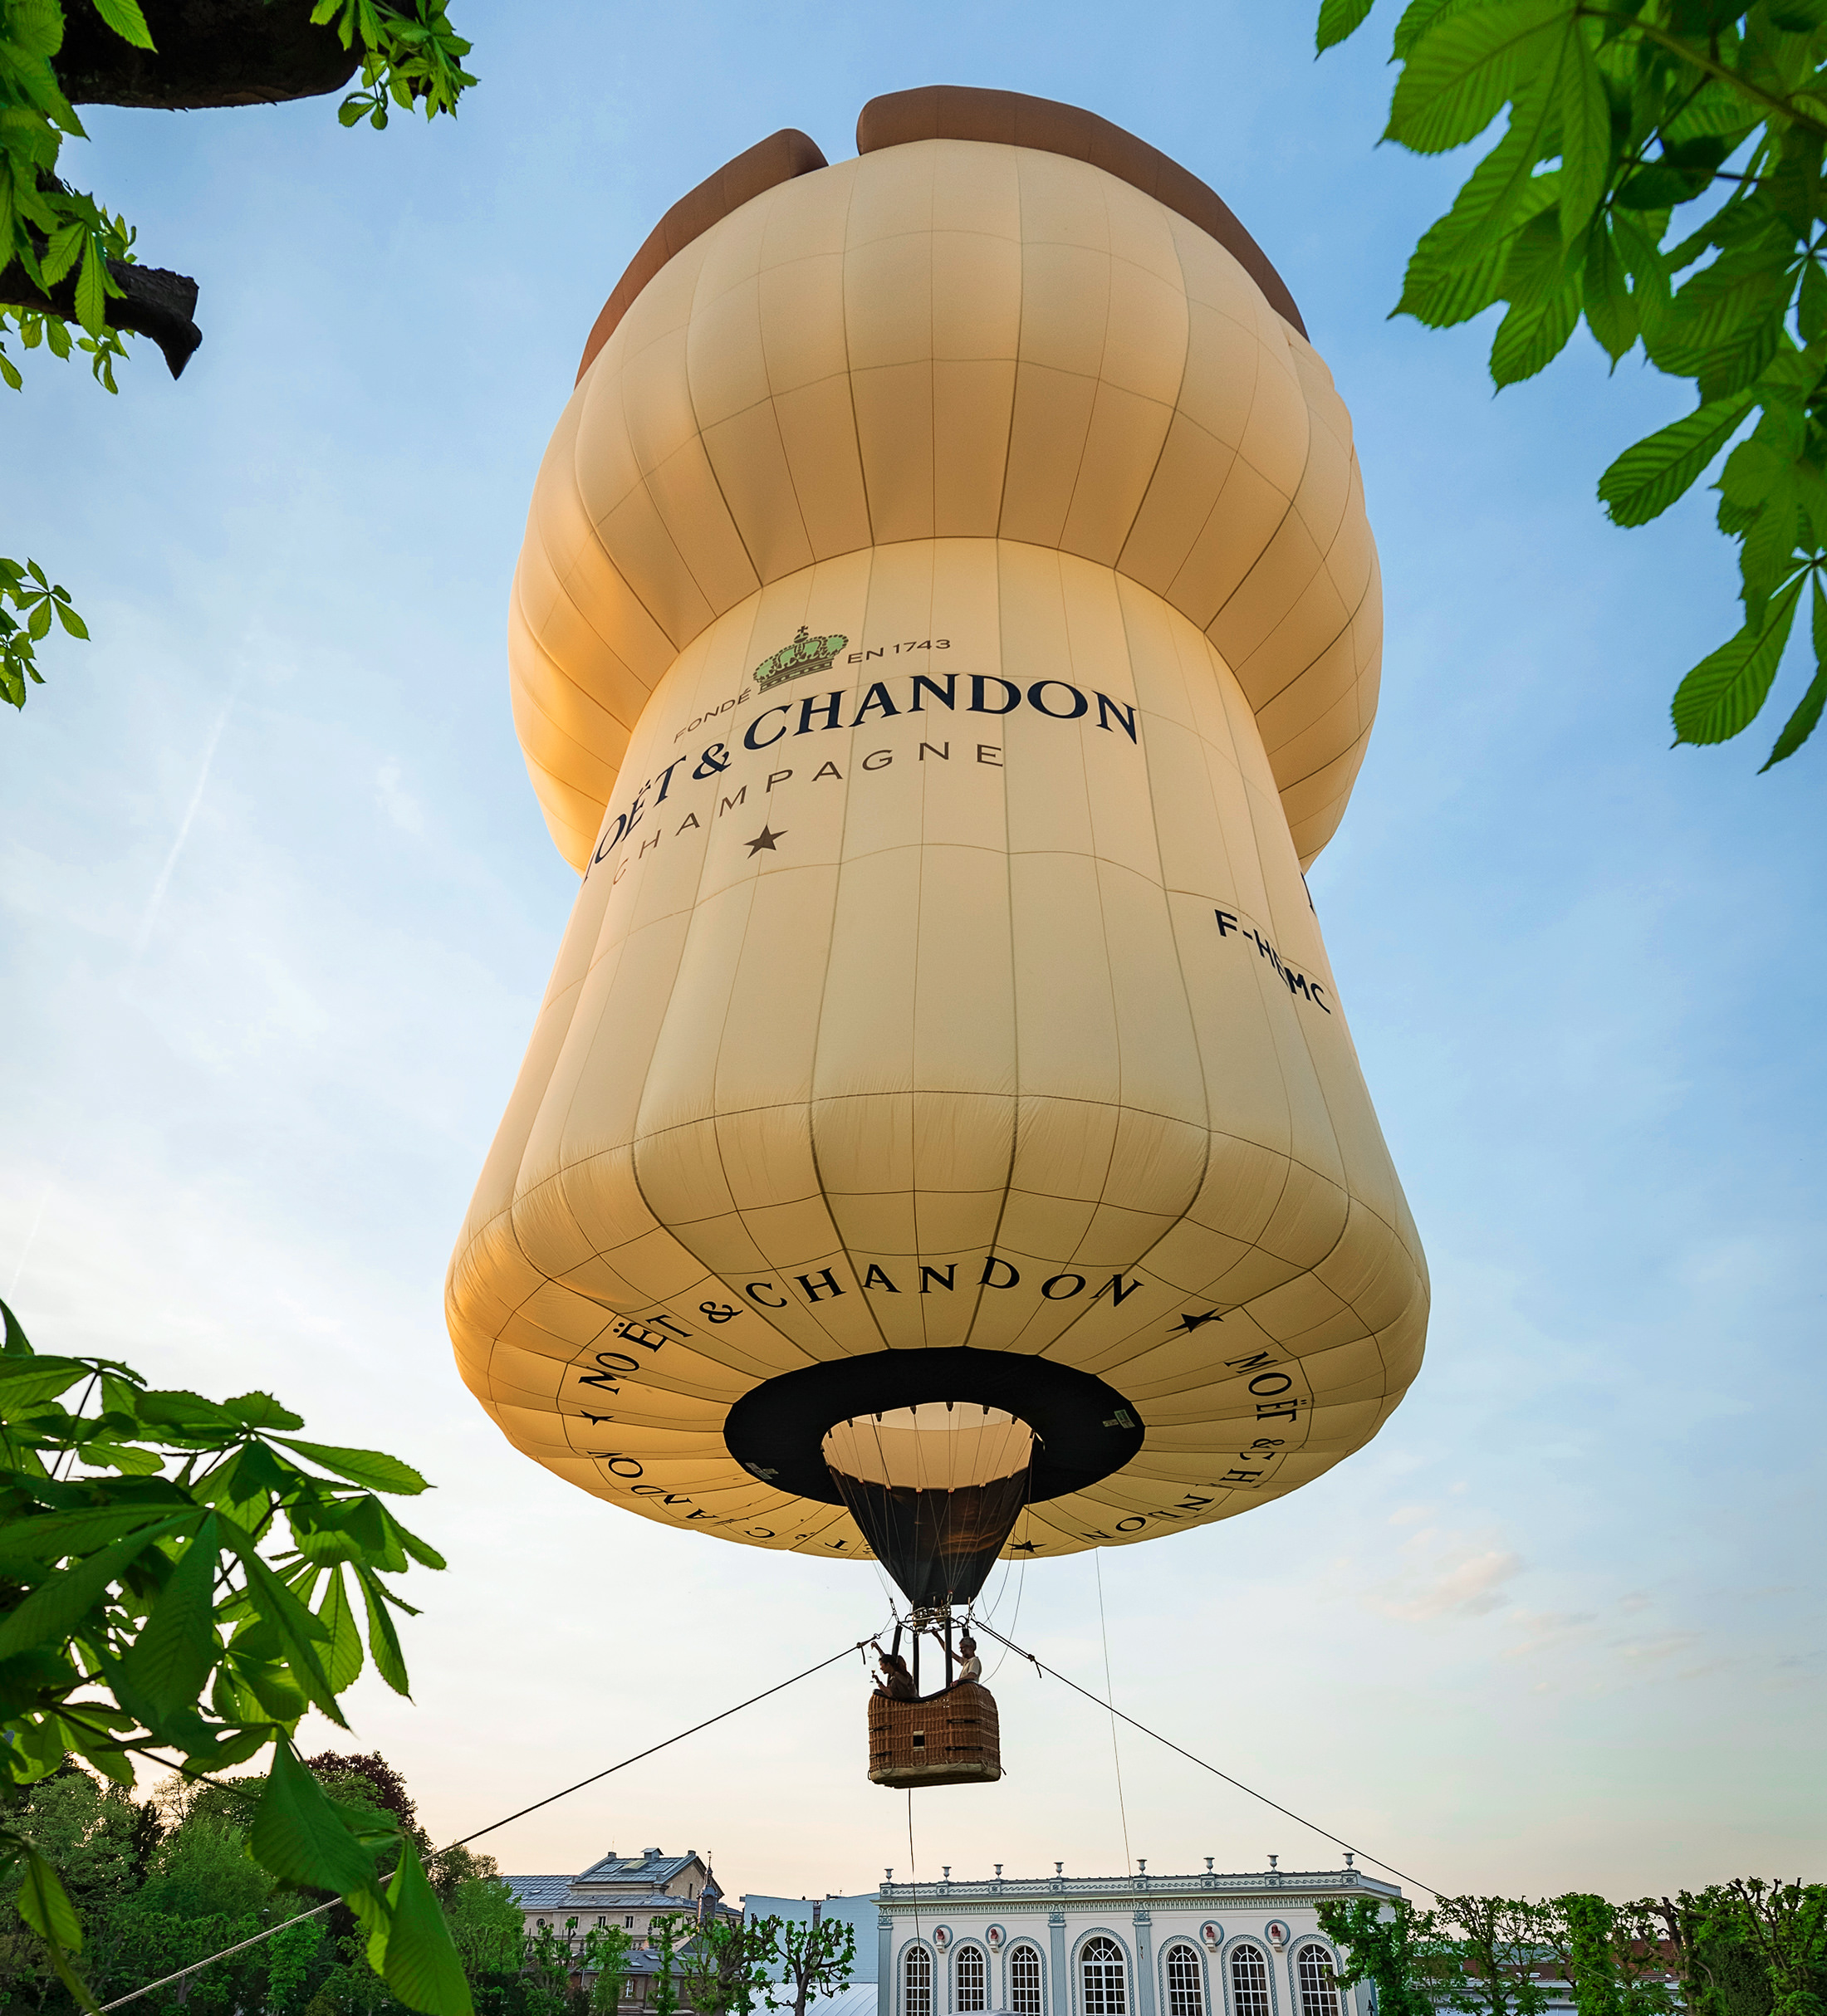 Moet & Chandon Champagner Haus, Avenue de Champagne, Epernay